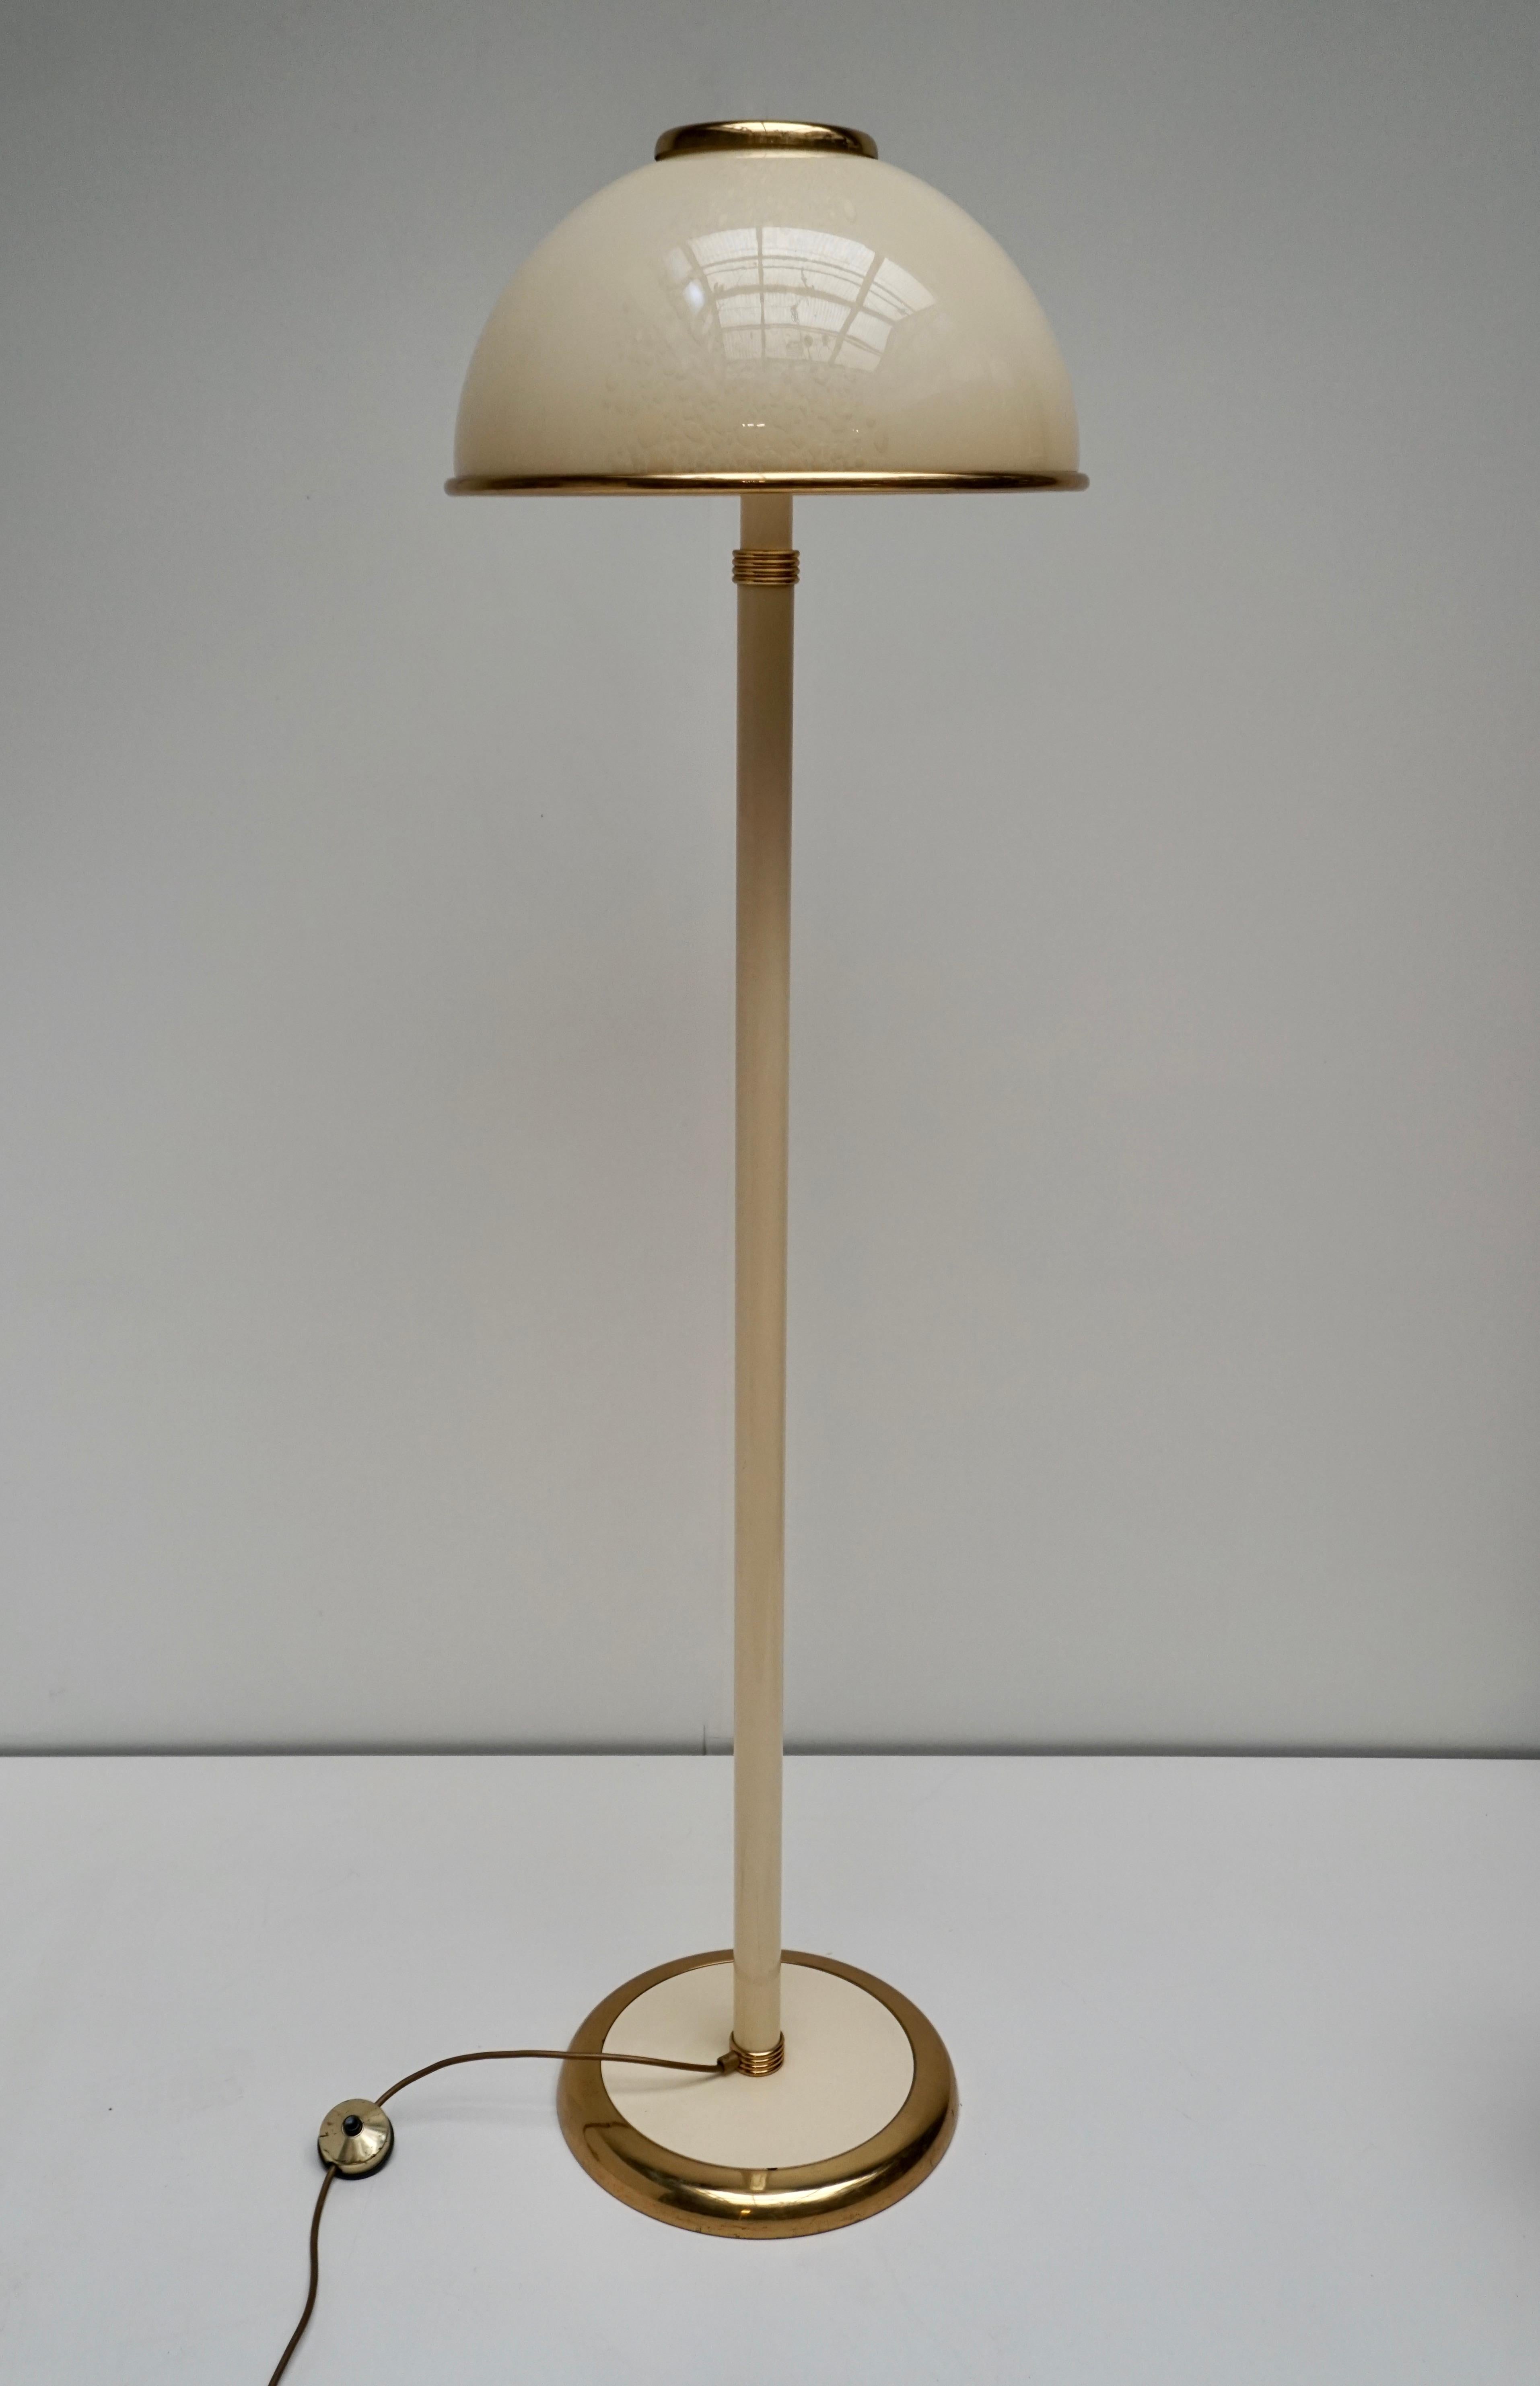 Italian cream Murano glass and brass floor lamp by F Fabbian.
The light requires two single E27 screw fit lightbulbs (60Watt max.) LED compatible.

We also have the same in a table lamp.
Height 163 cm.
Diameter 46 cm.
Weight 12 kg.

